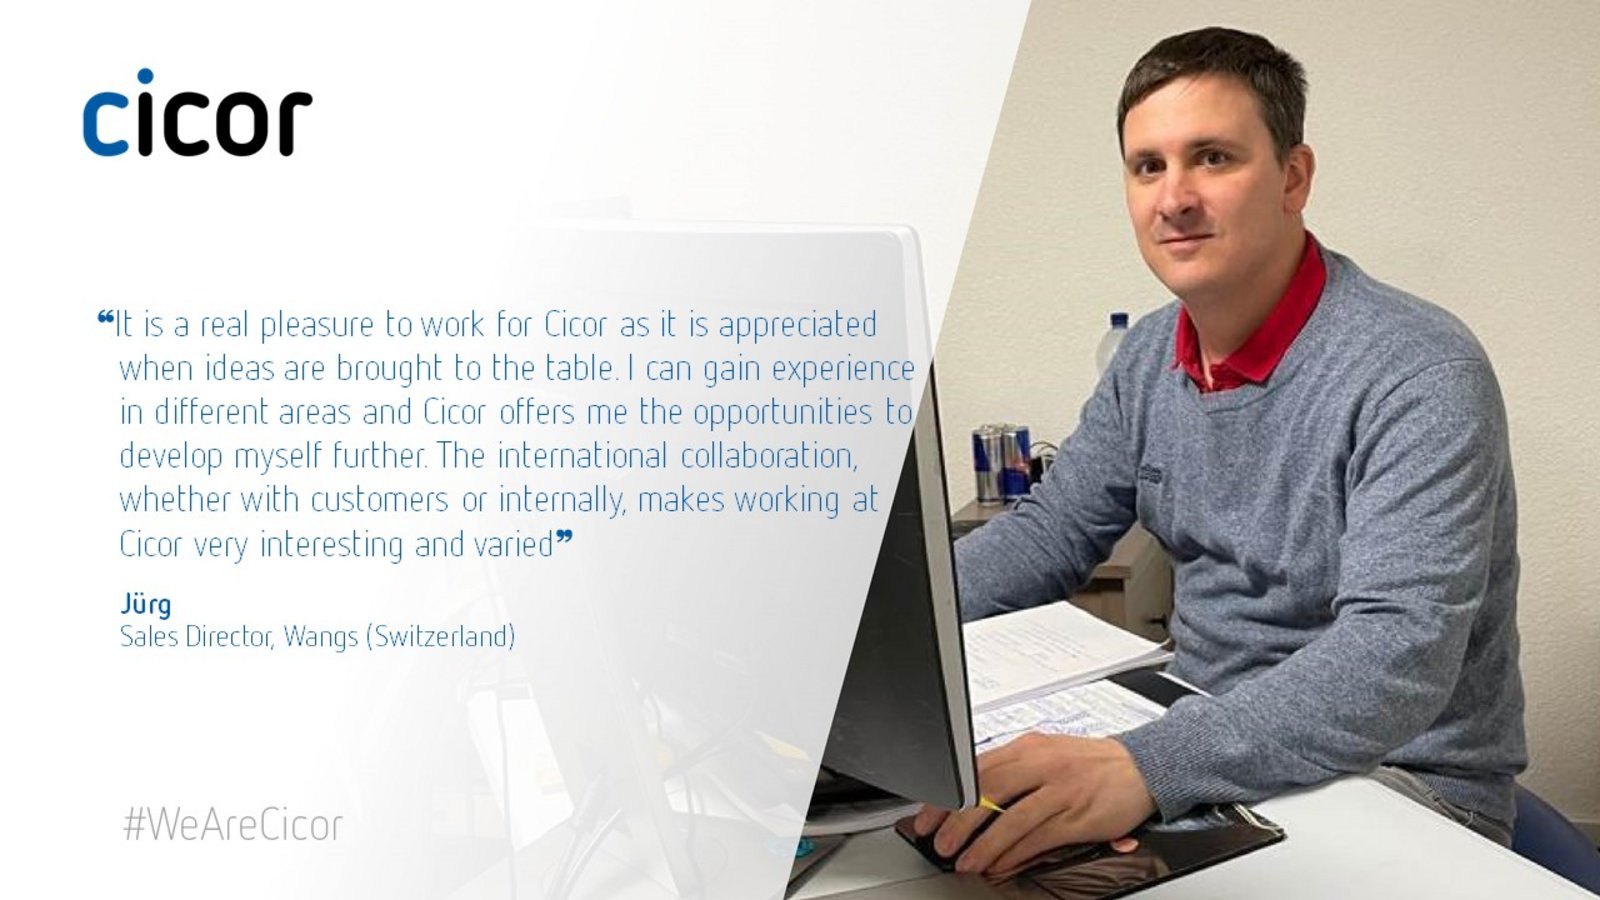 Testimonial of Juerg who works at the Cicor site in Wangs